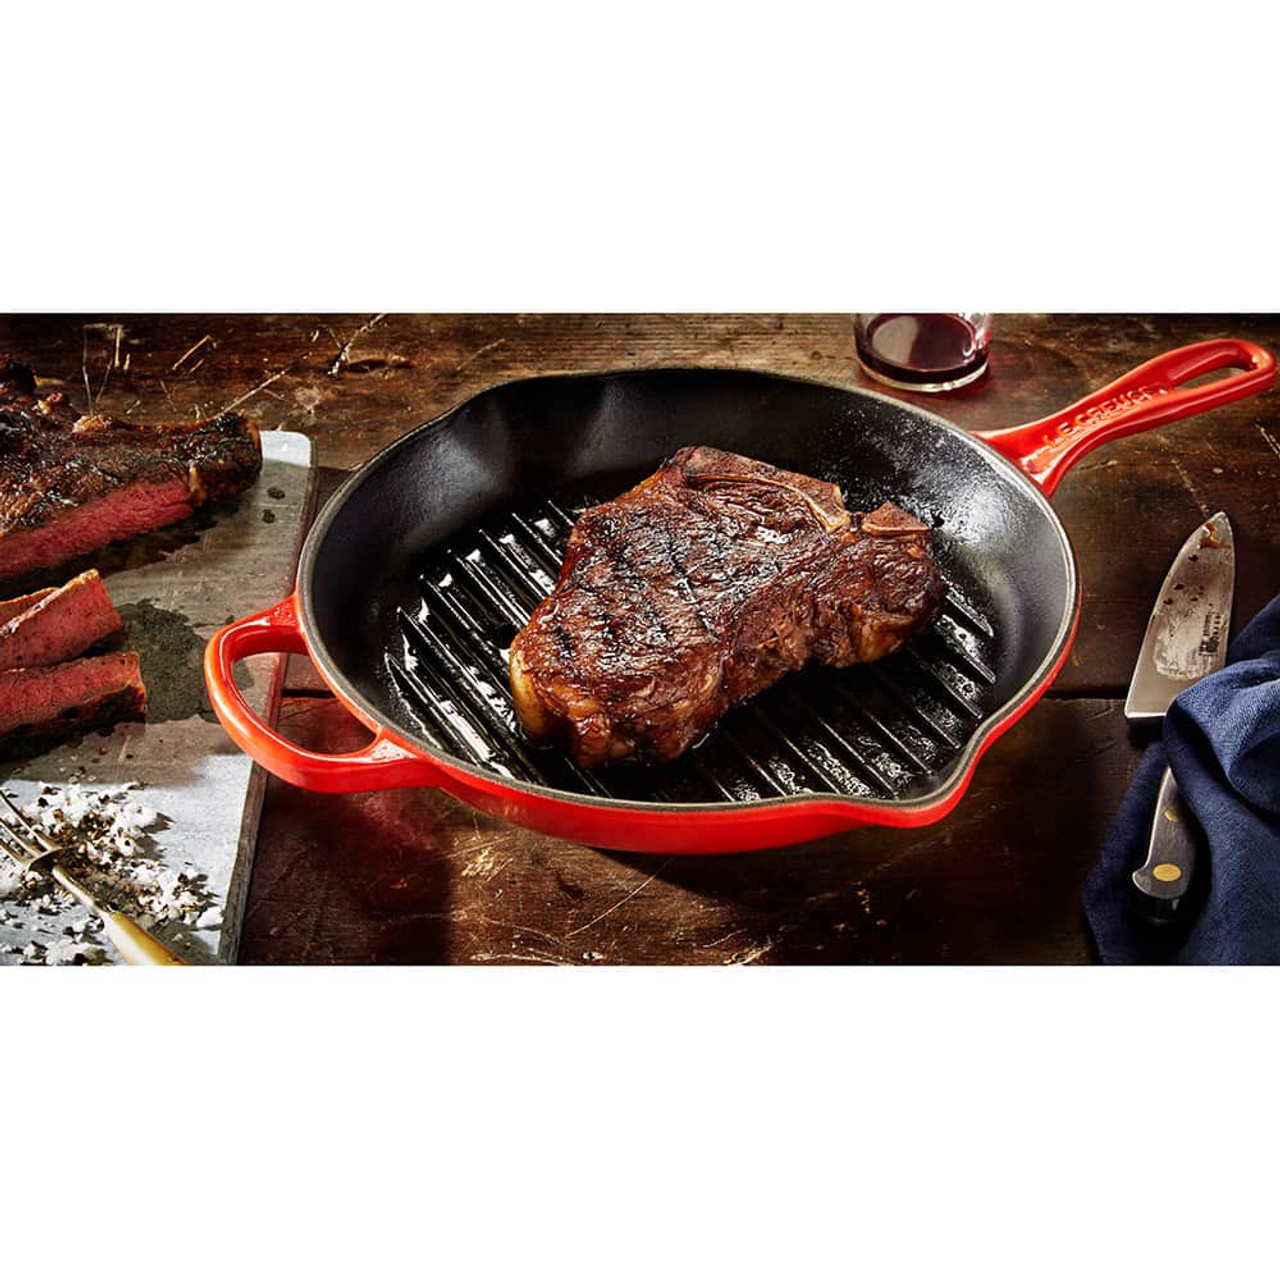 https://cdn11.bigcommerce.com/s-hccytny0od/images/stencil/1280x1280/products/1891/6437/le-creuset-signature-skillet-cerise-1__64281.1587698095.jpg?c=2?imbypass=on